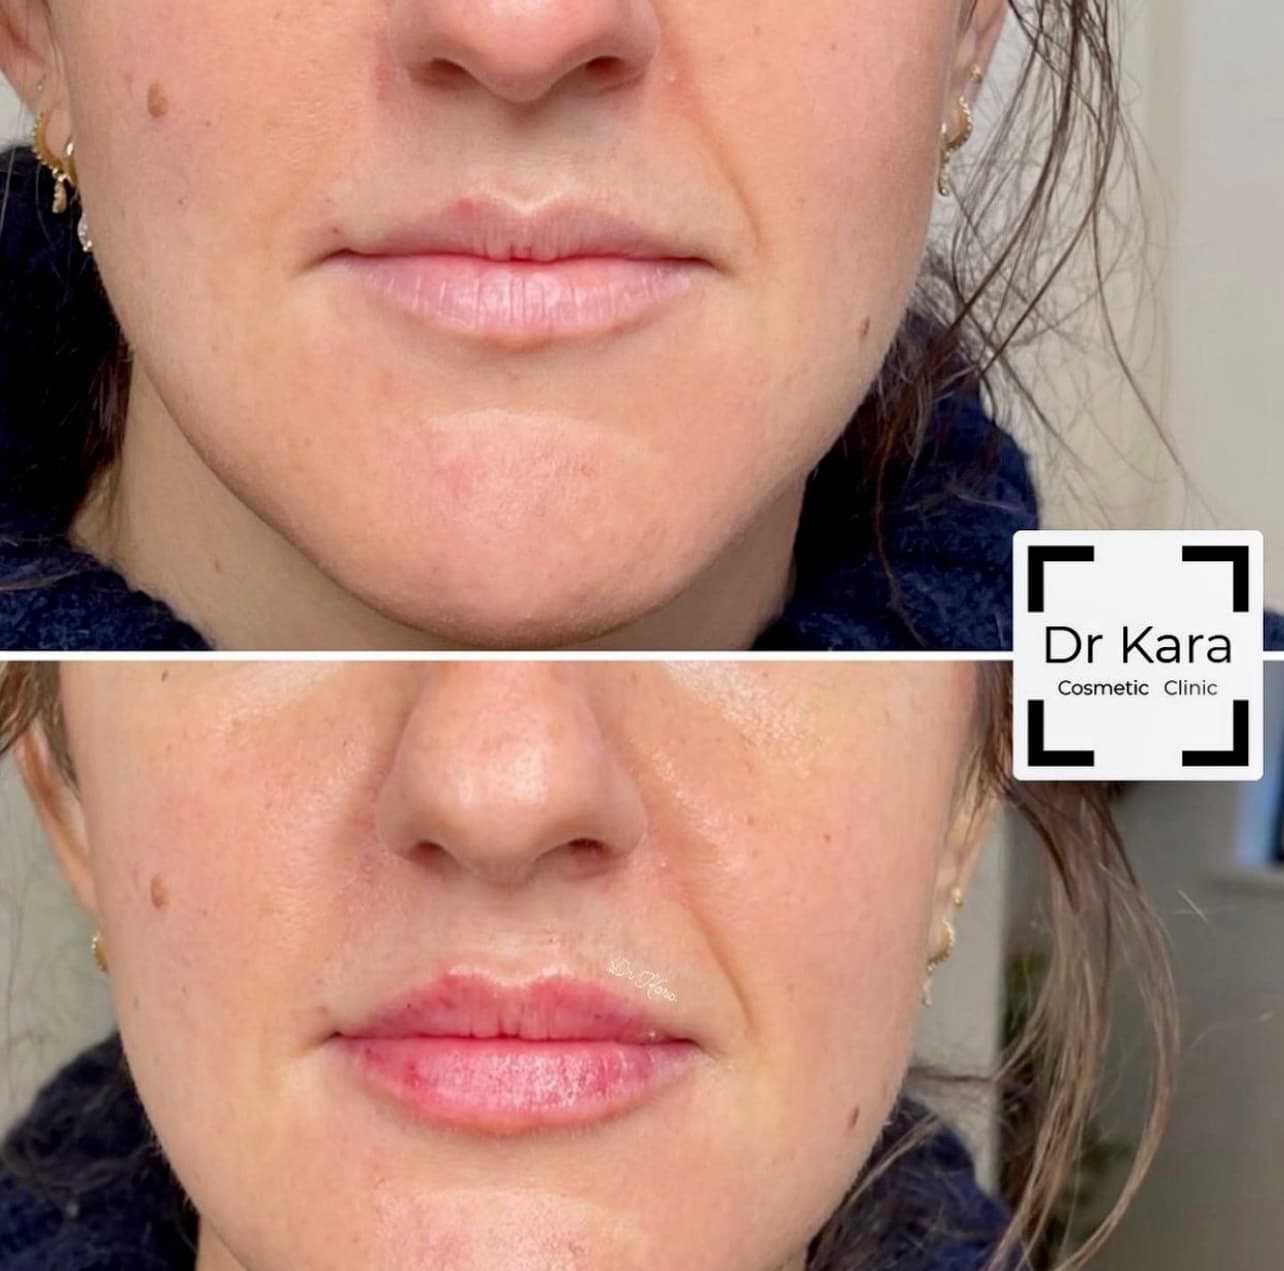 Lip filler before and after result by Dr Kara Cosmetic Clinic in Norwich, Norfolk, UK